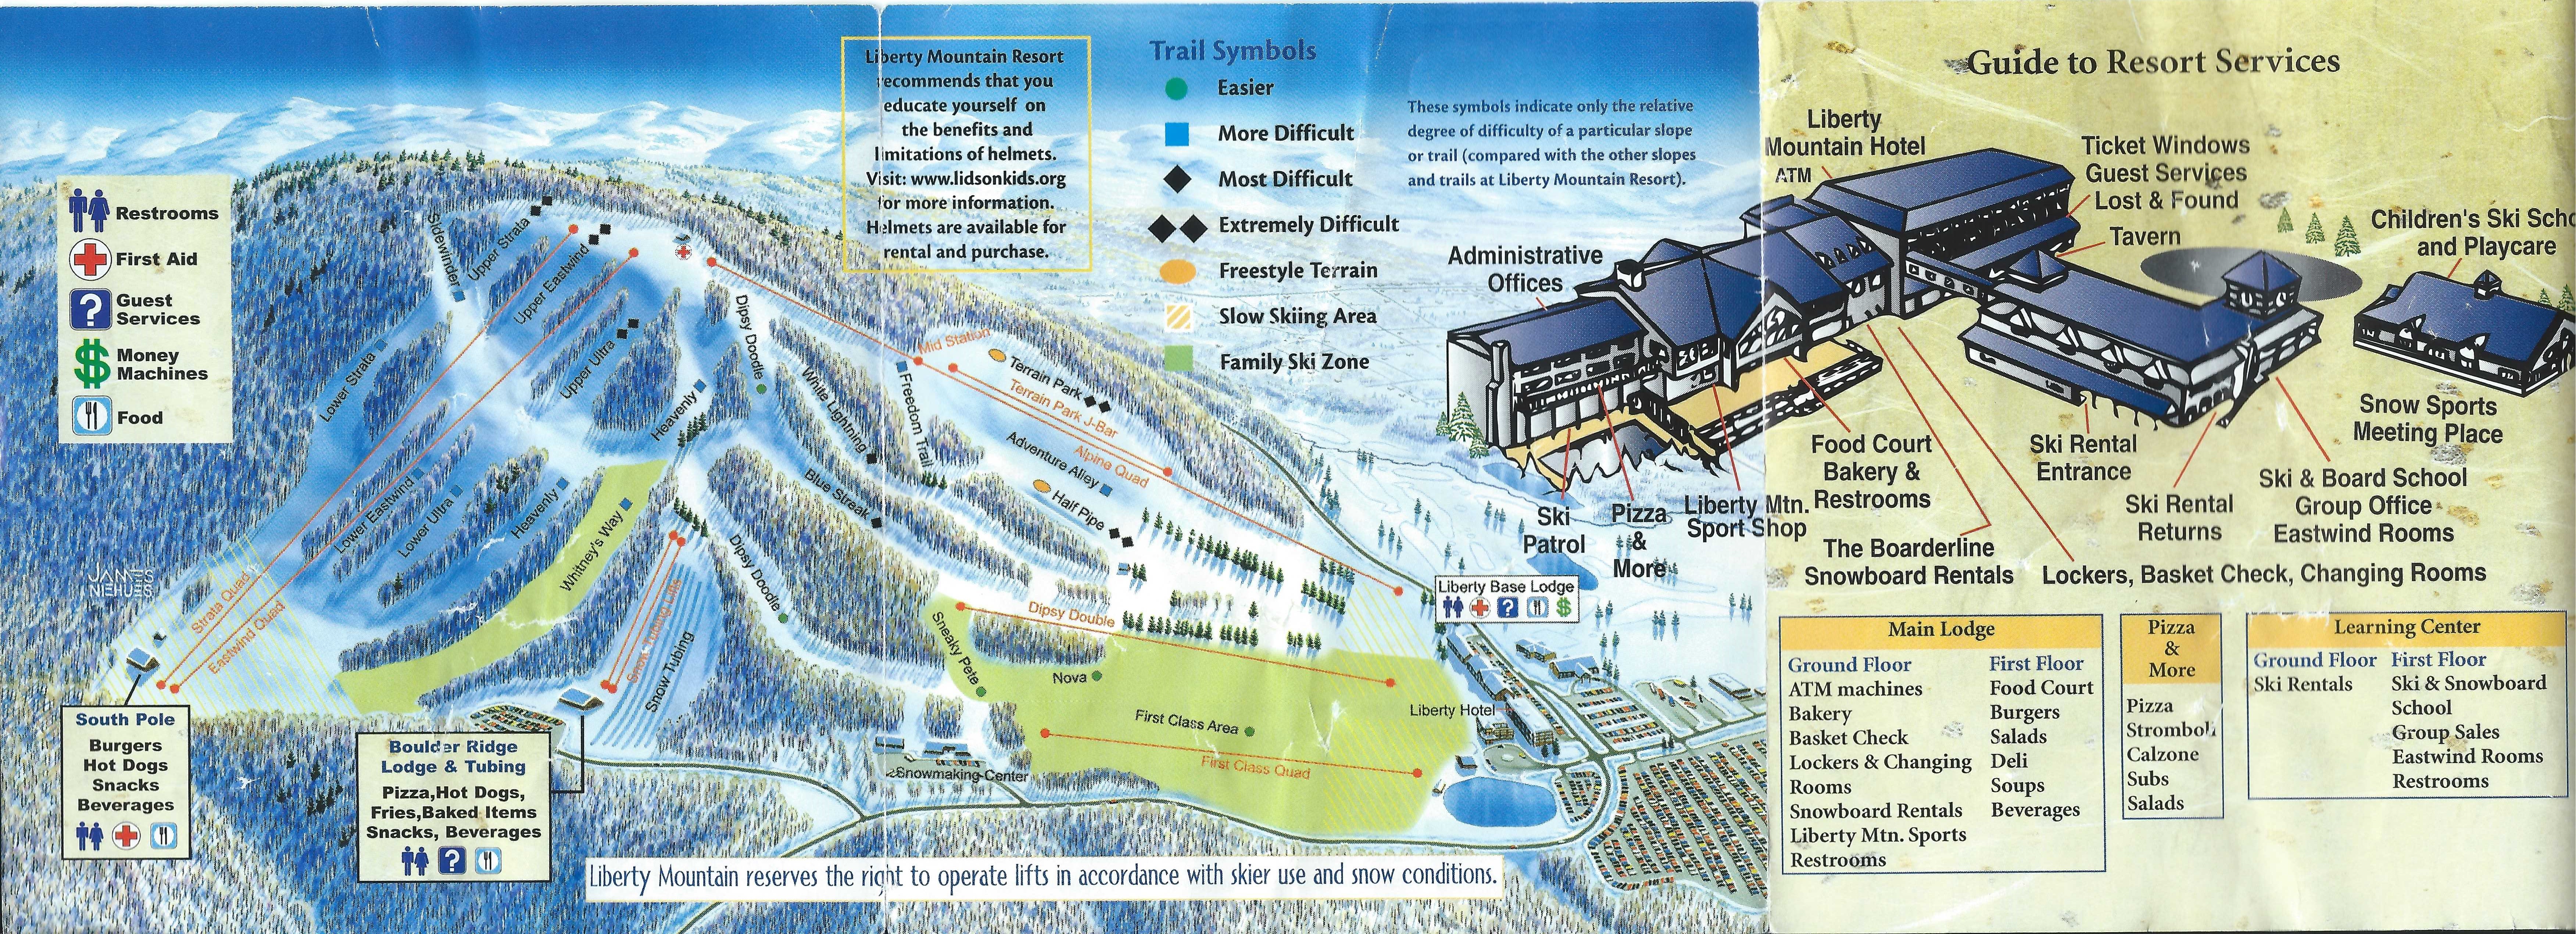 No date shown.  Sources show the tubing was built and 2003 and a later map from 2005 is on the site.  Notable is the renaming of the Snowboard Park to Terrain Park.  As I recall from skiing there, skiing was not allowed in the "snowboard" park and pipe at some point.